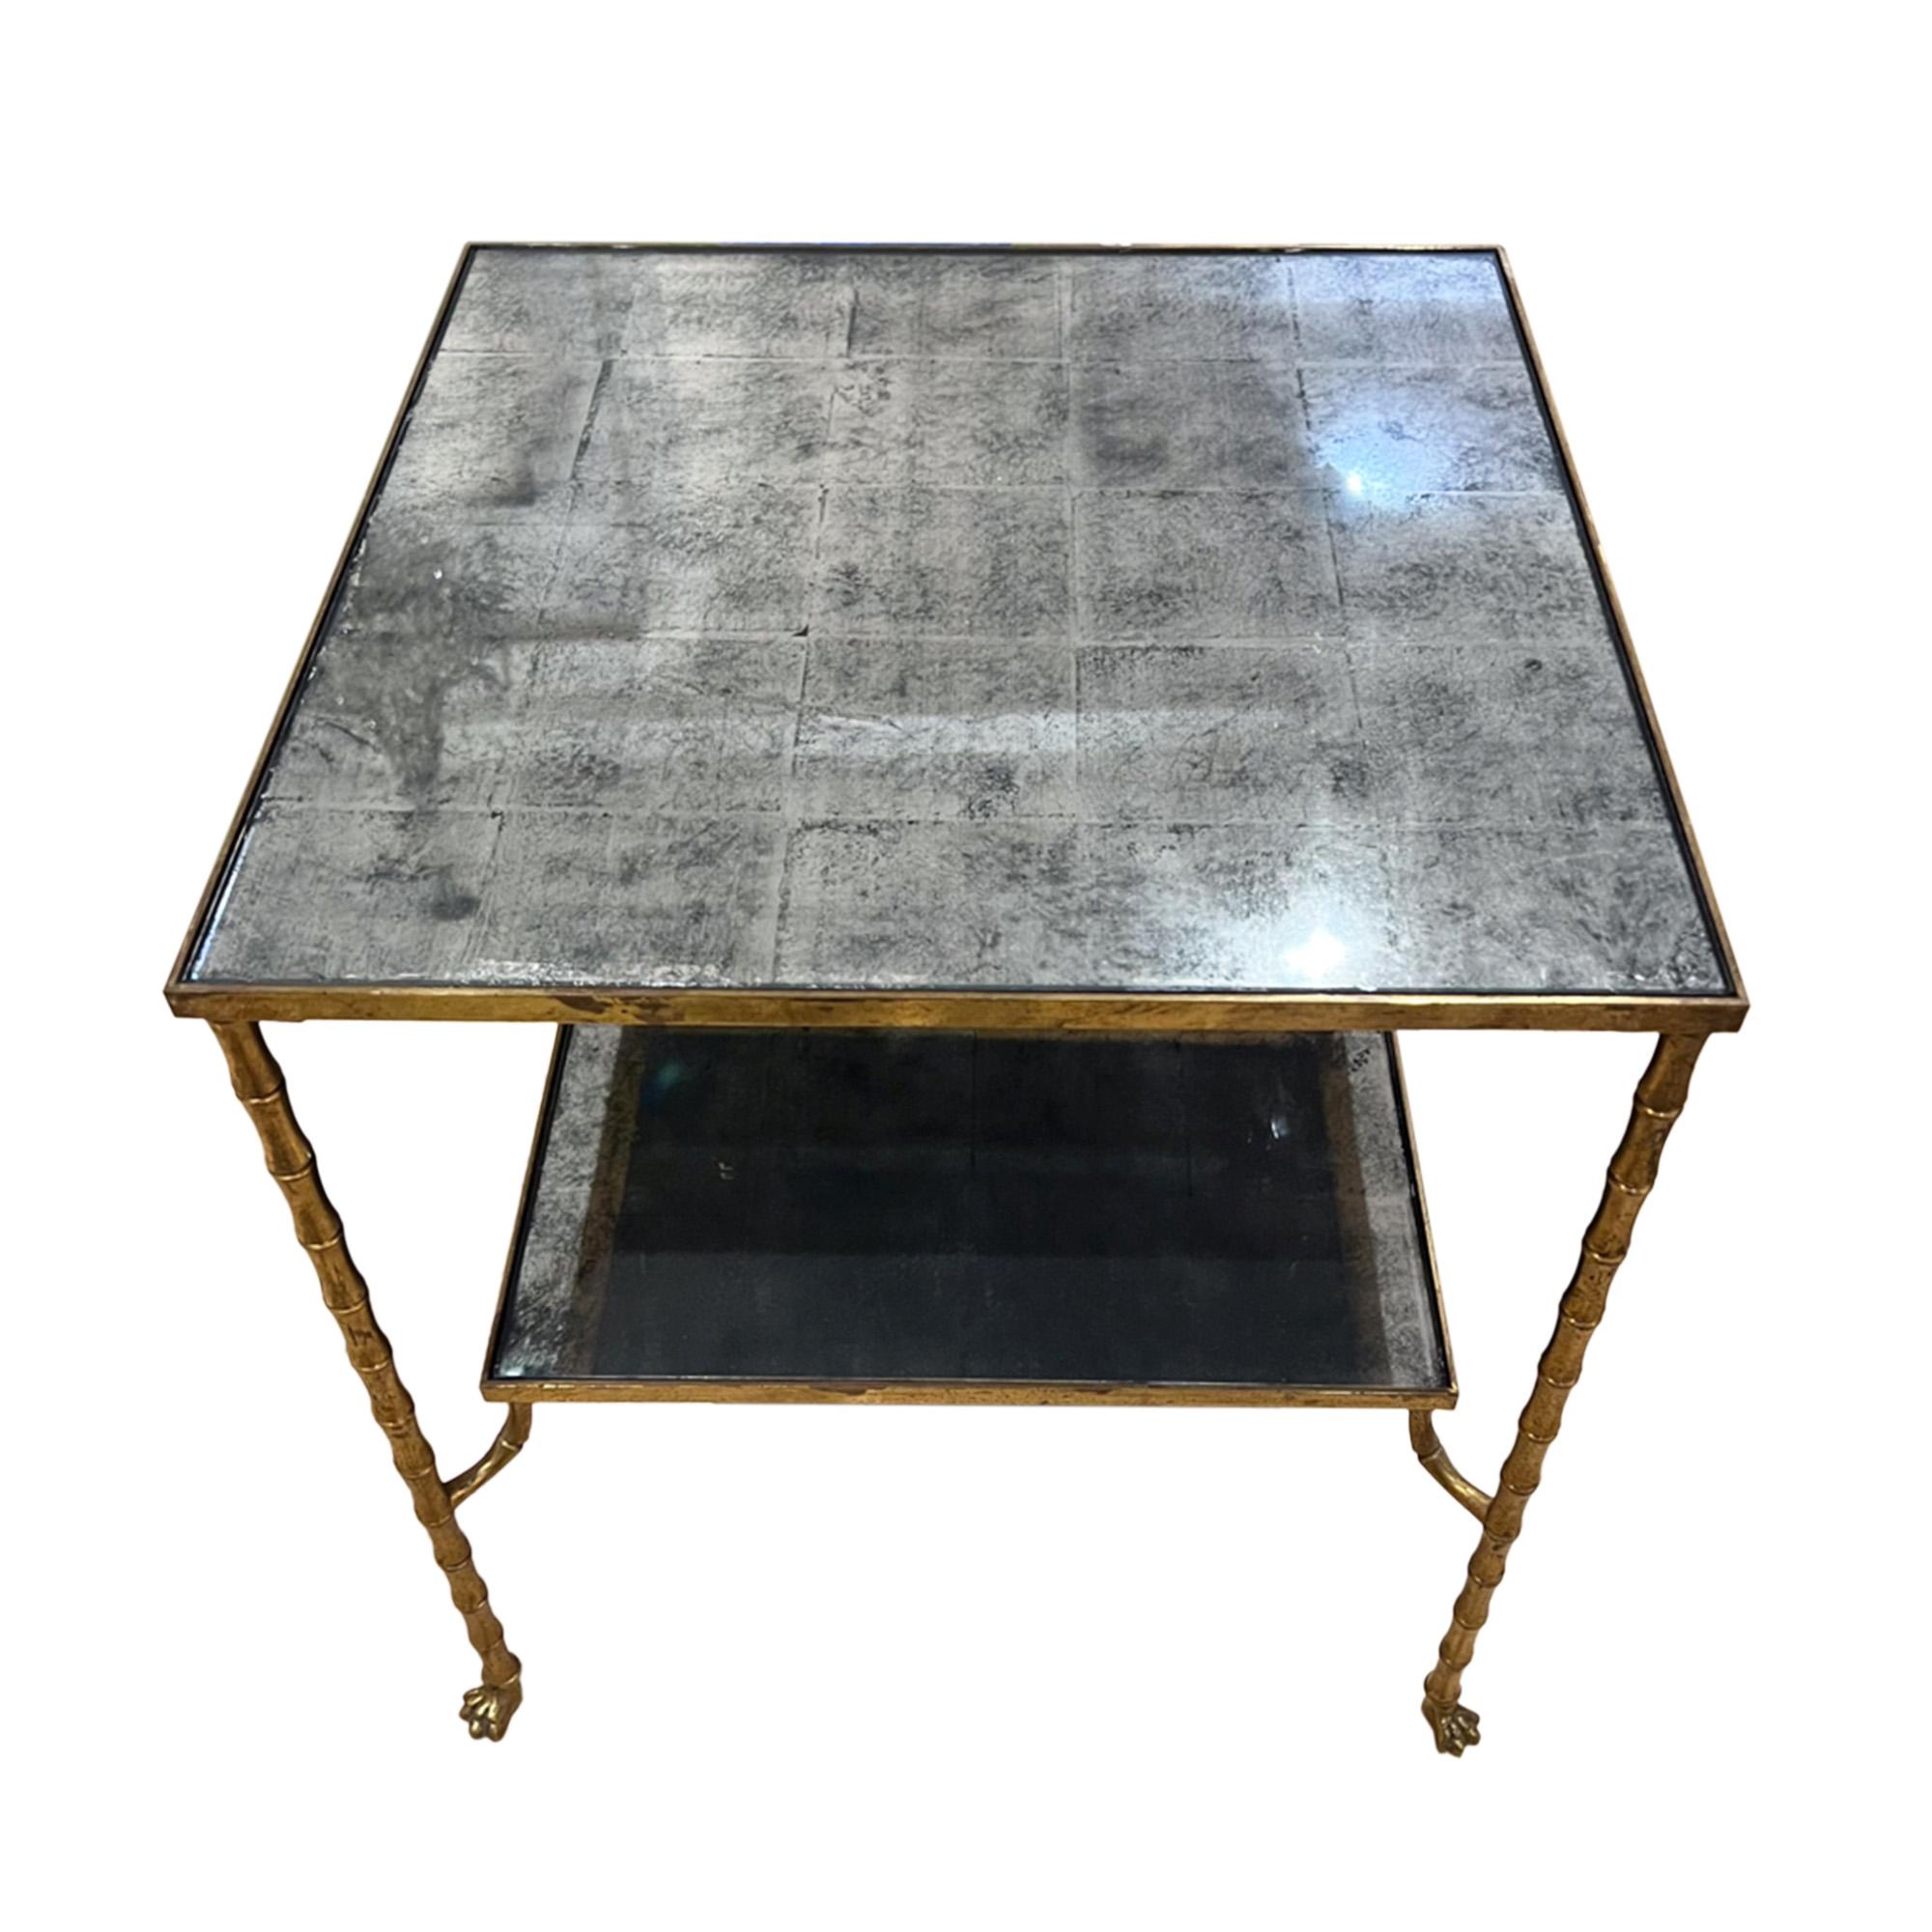 This is a lovely French midcentury side table, made from brass with a faux bamboo design with delightful paw feet. The eglomise glass on both shelves has a faint checked pattern - please take a look at all our photos to see the detail.

A good size